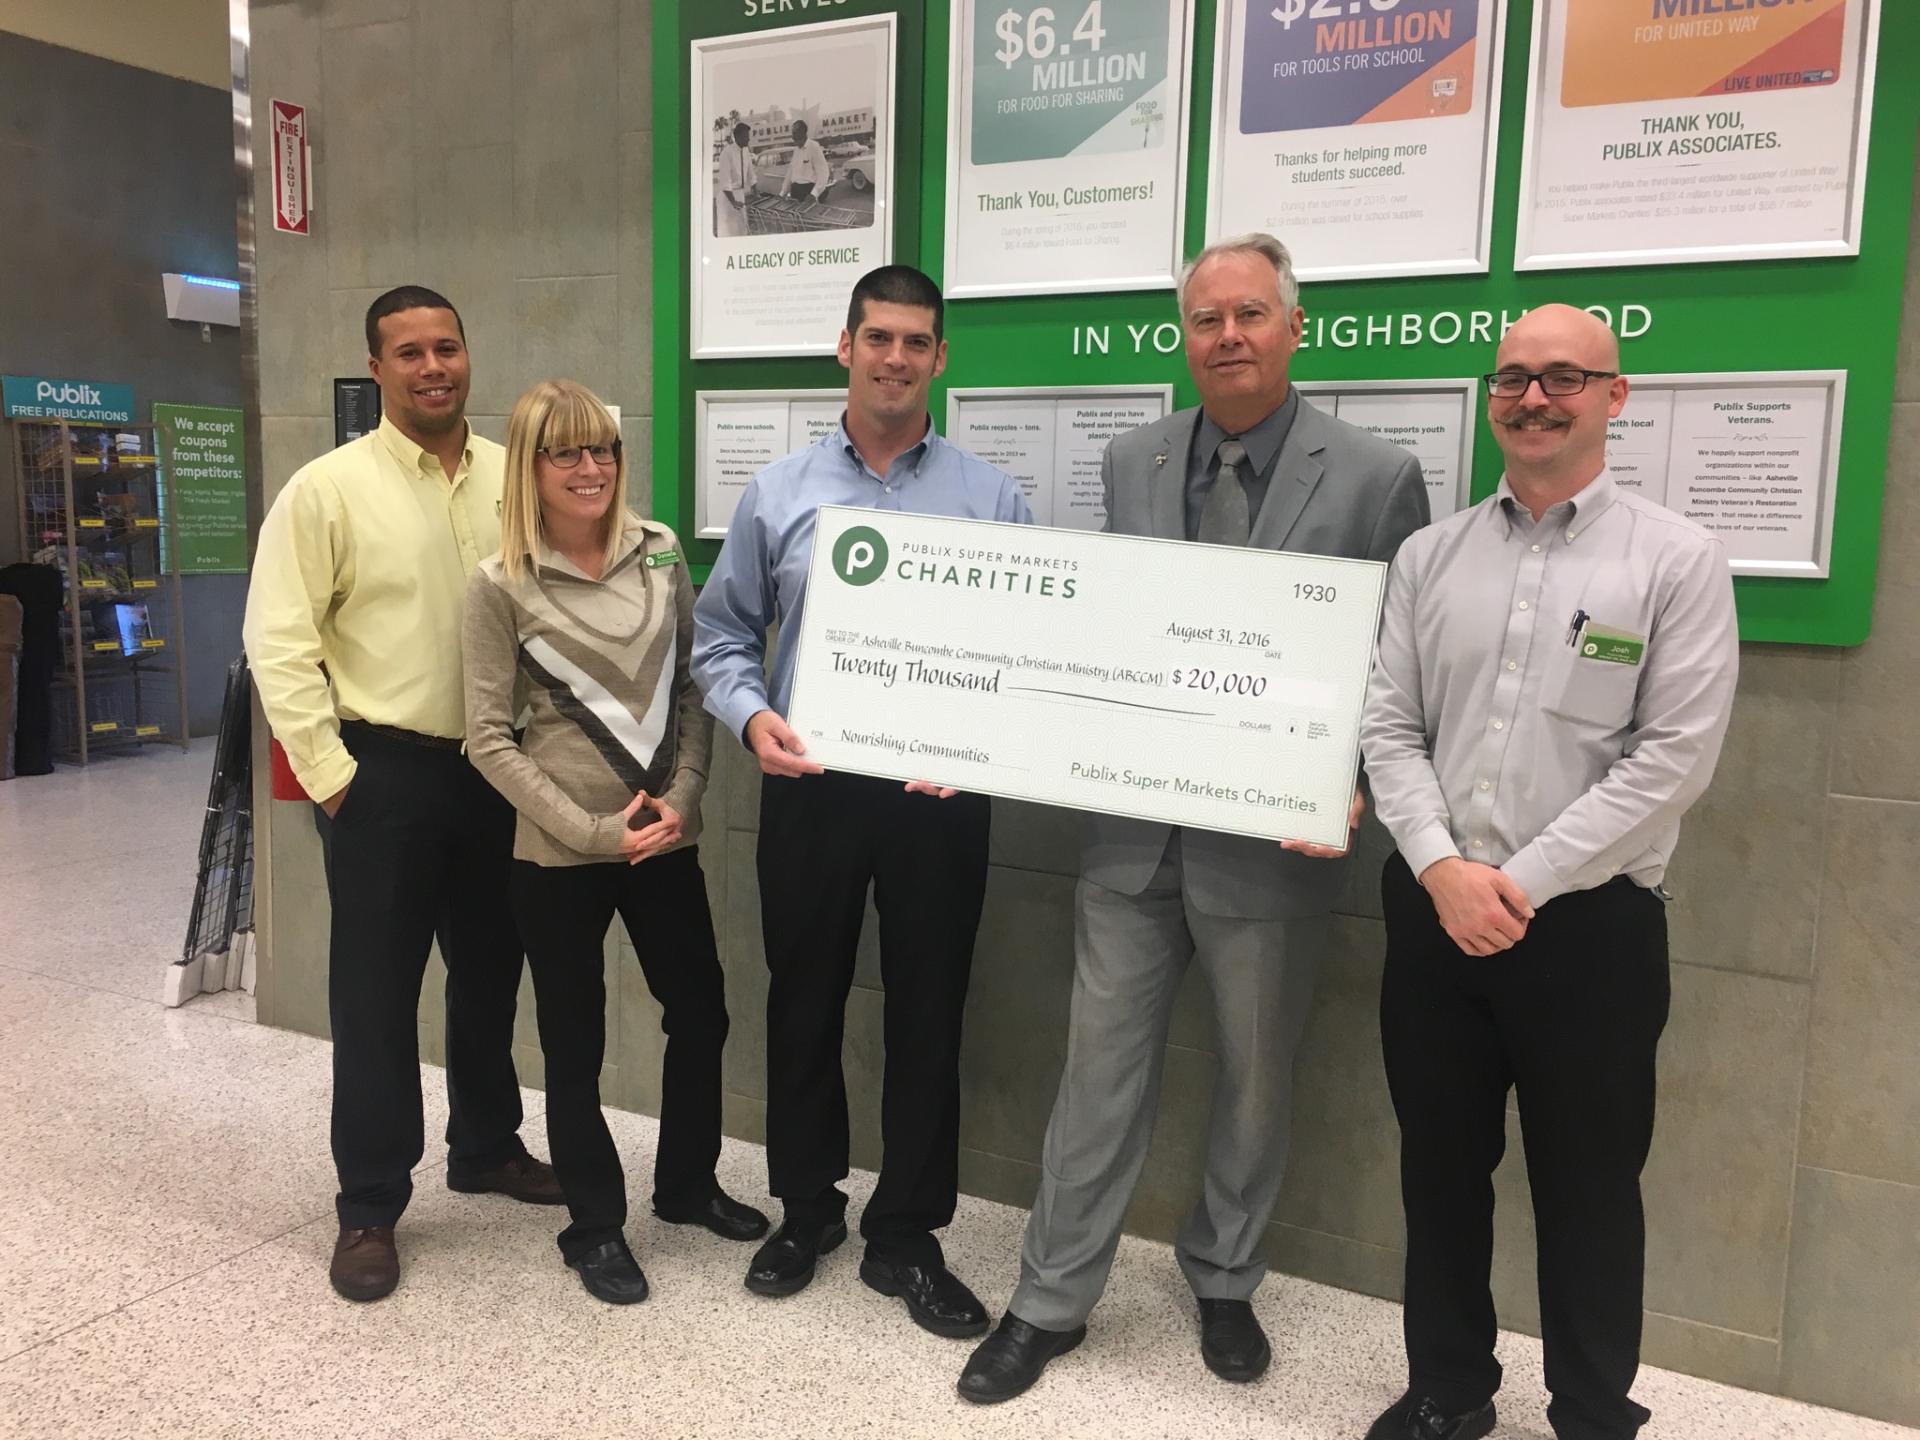 Reverend Scott Rogers, ABCCM's executive director (second from right) accepts a donation from Publix Super Markets Charities along with (left to right) David Yancy, grocery manager;&nbsp;Danielle Meyer,&nbsp;assistant customer service manager;&nbsp;…